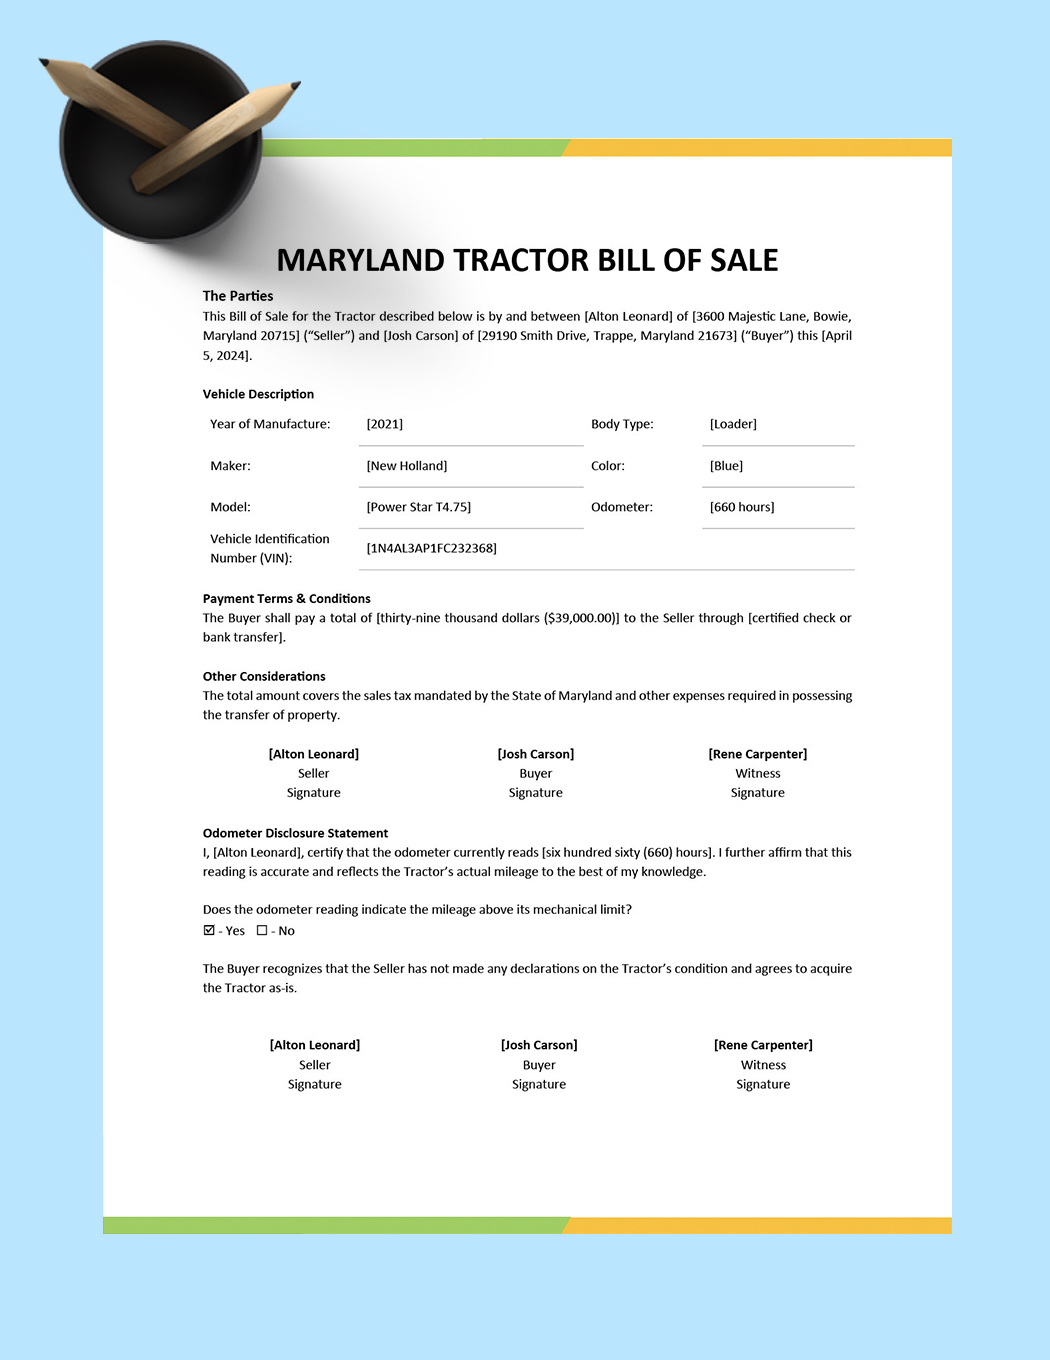 Maryland Tractor Bill of Sale Template